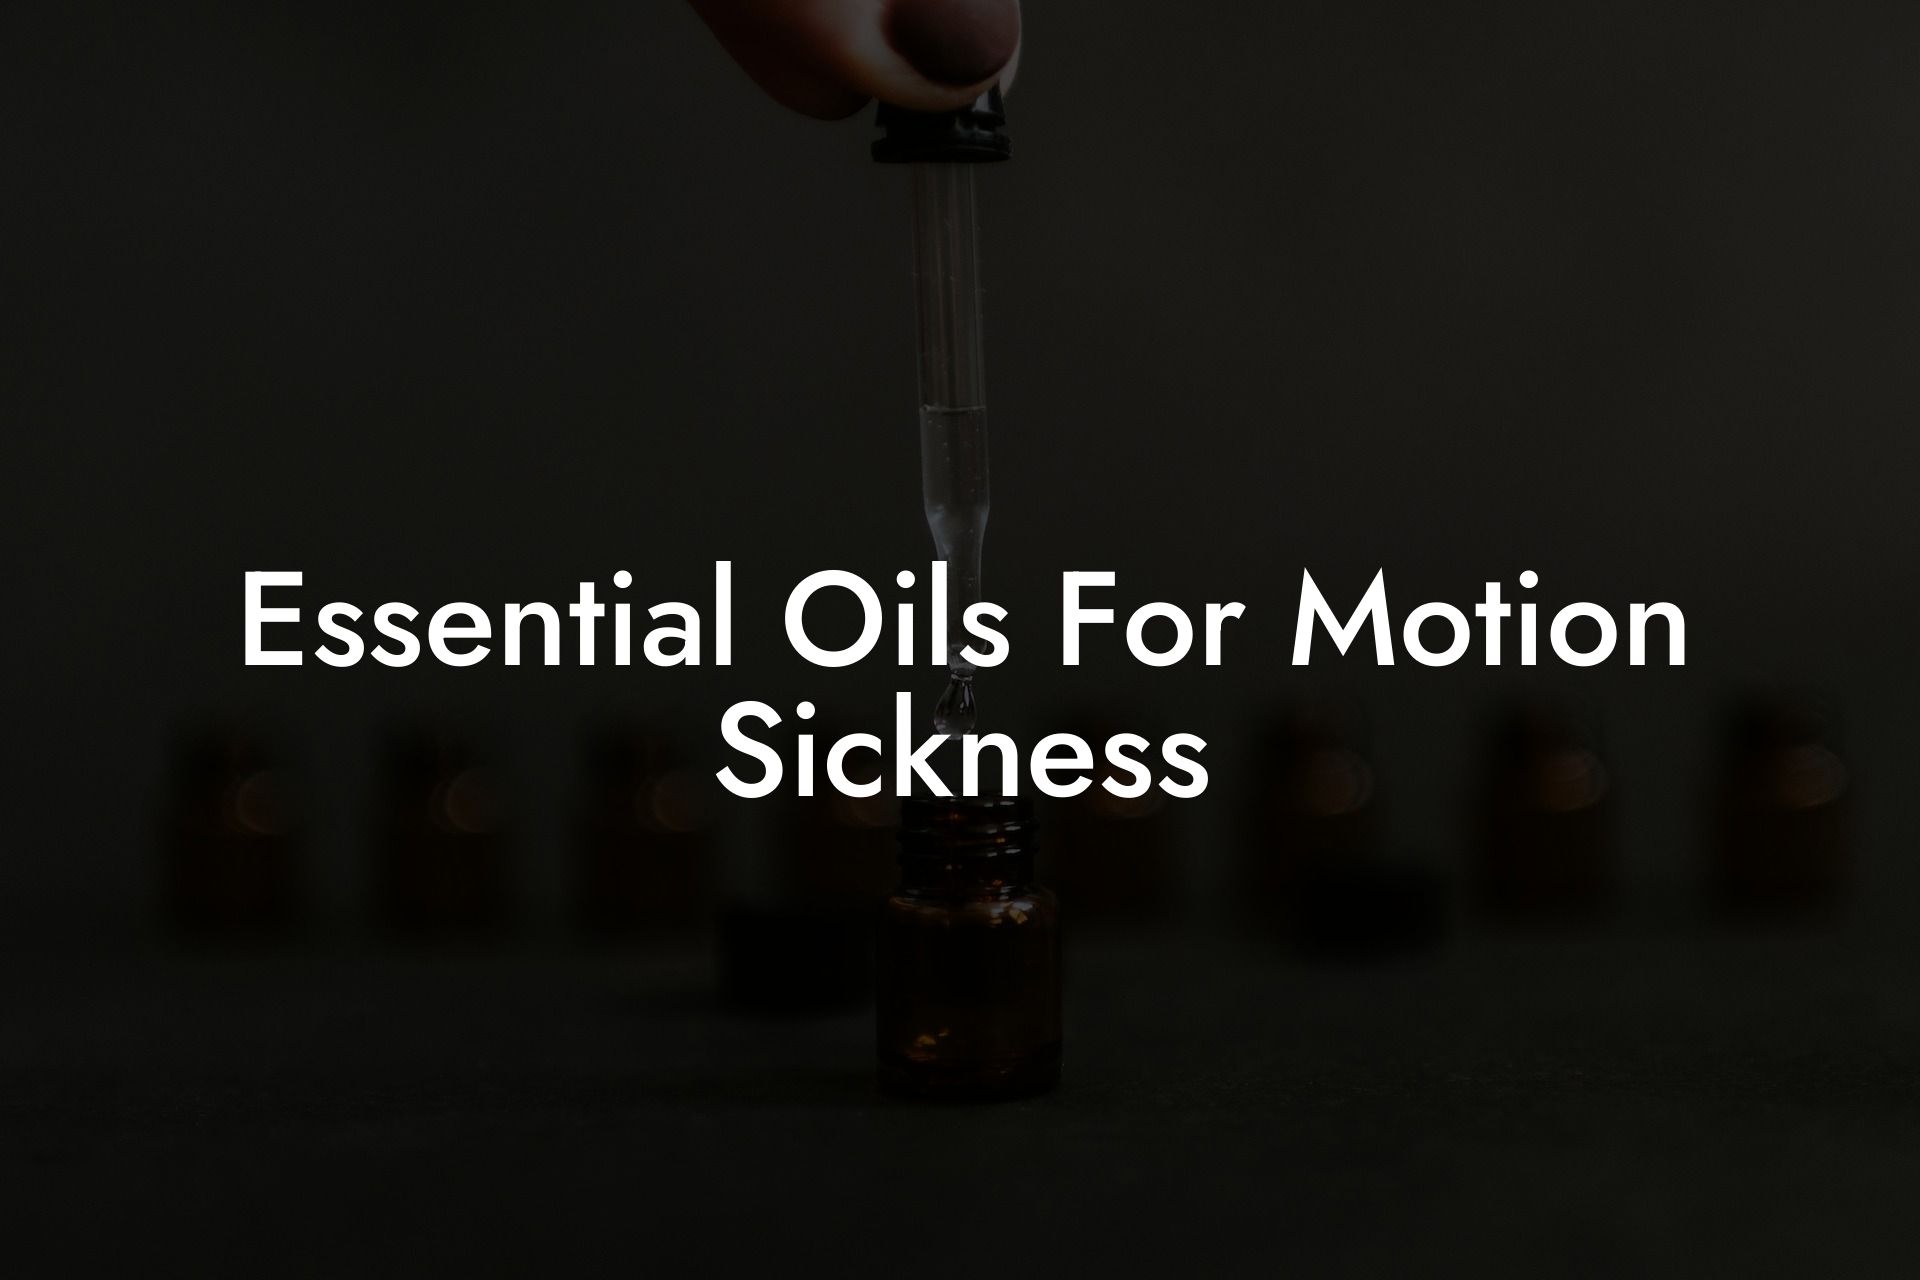 Essential Oils For Motion Sickness